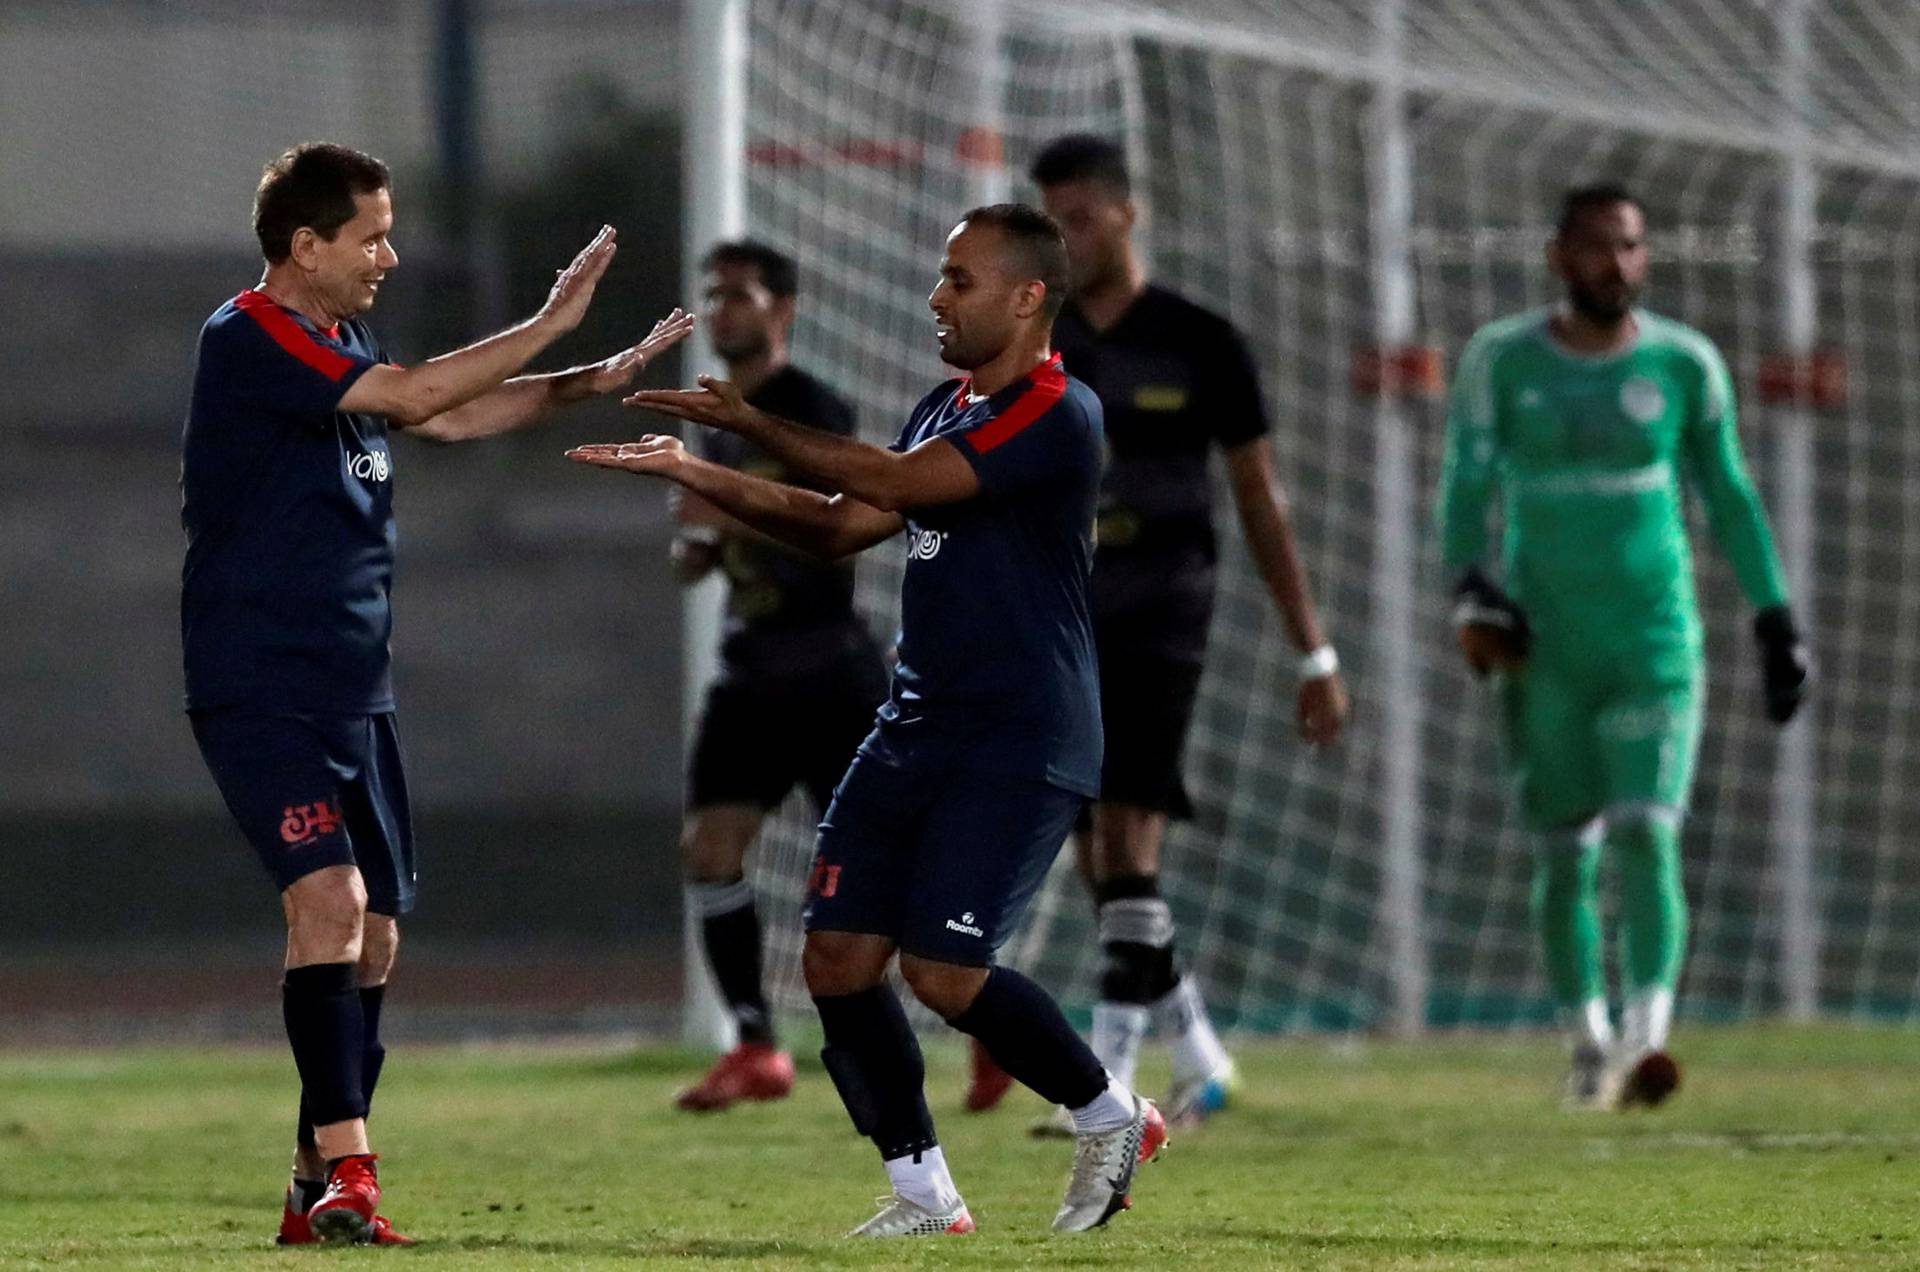 Ezzeldin Bahader, a 74-years-old Egyptian football player of 6th October Club celebrates with players after a soccer match against El Ayat Sports Club of Egypt's third division league at the Olympic Stadium in the Cairo suburb of Maadi